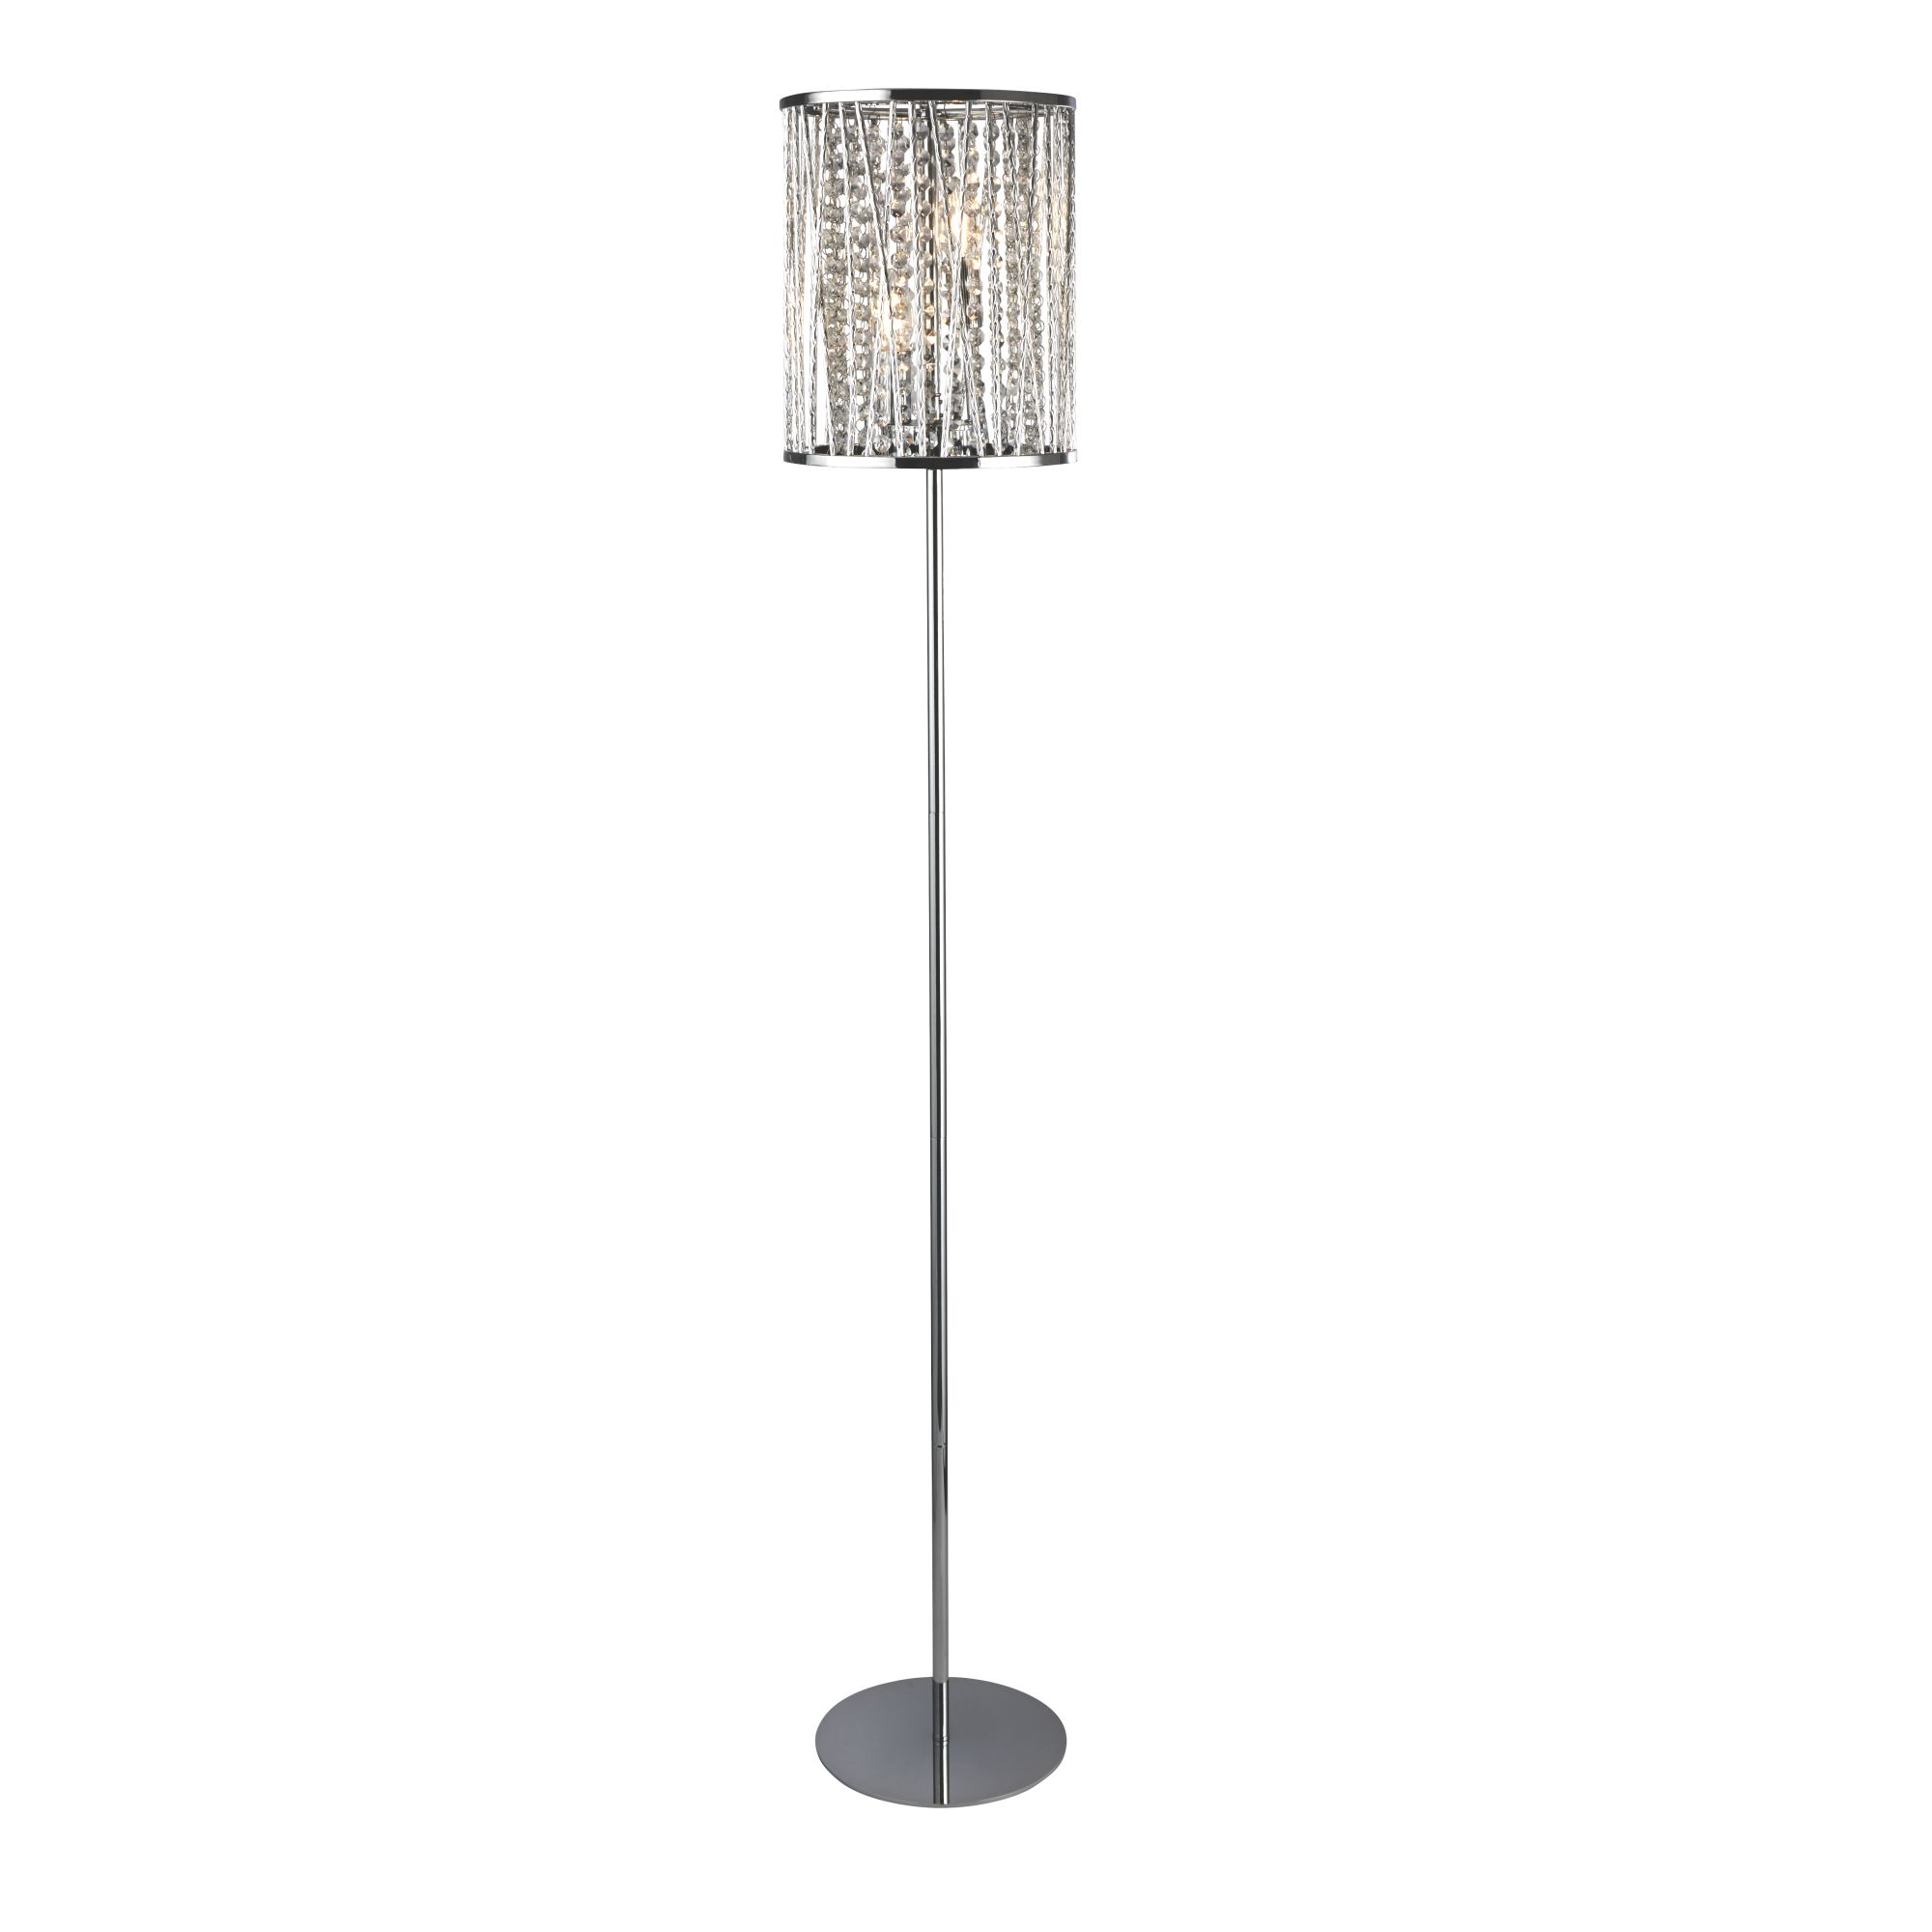 Elise 2 Light Floor Lamp with Crystal Drops